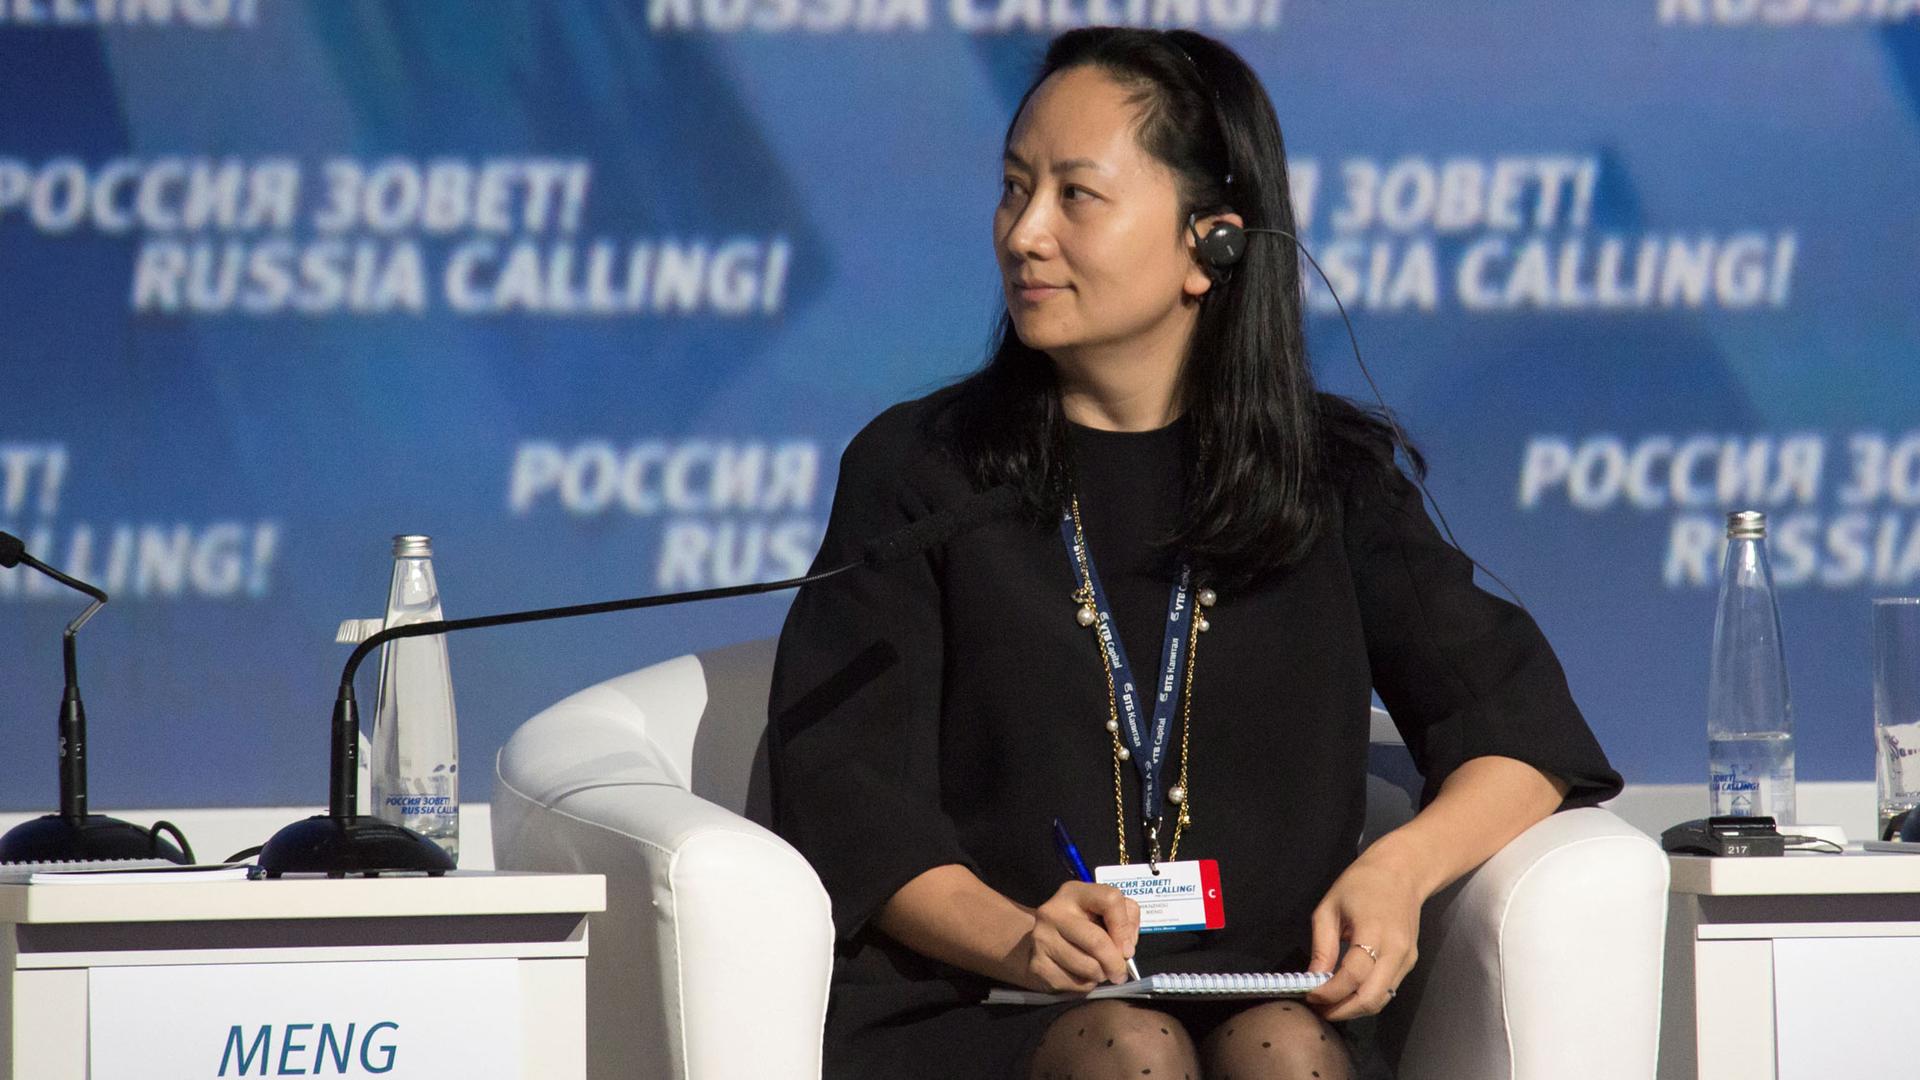 Meng Wanzhou, wearing all black, is shown seated with a pen and notepad at a session of the VTB Capital Investment Forum "Russia Calling!" in Moscow, Russia, 2014. 